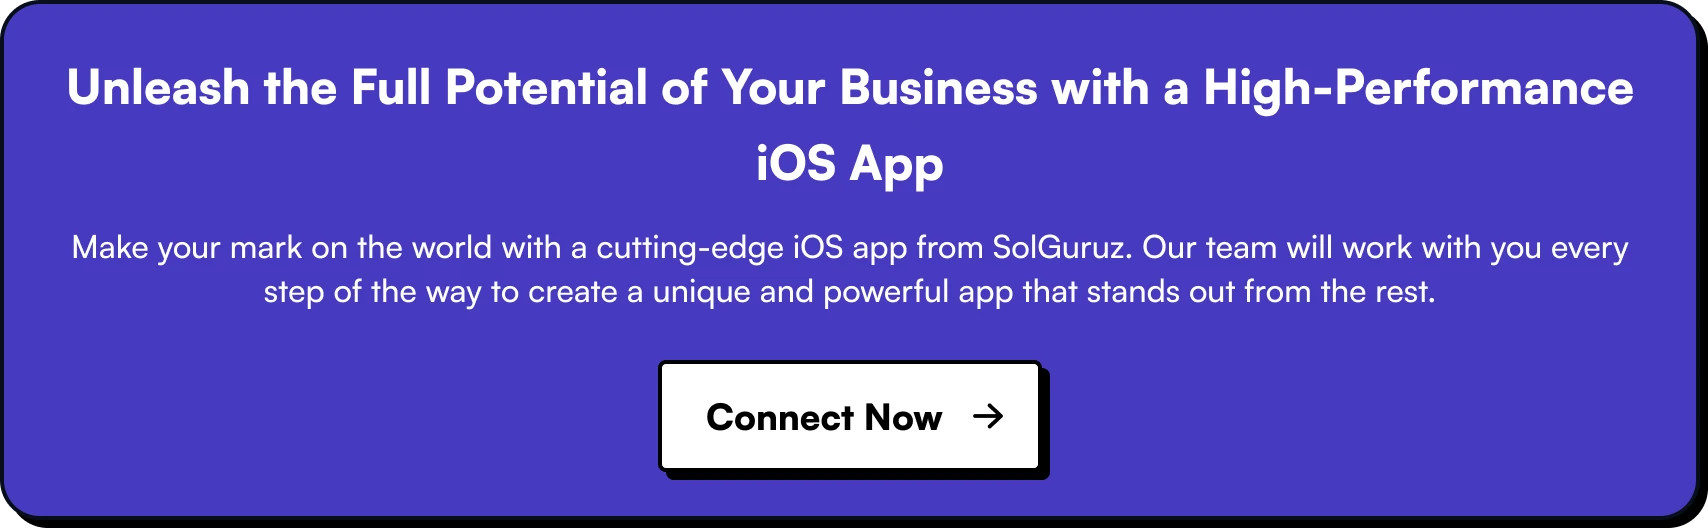 Unleash the Full Potential of Your Business with a High-Performance iOS App